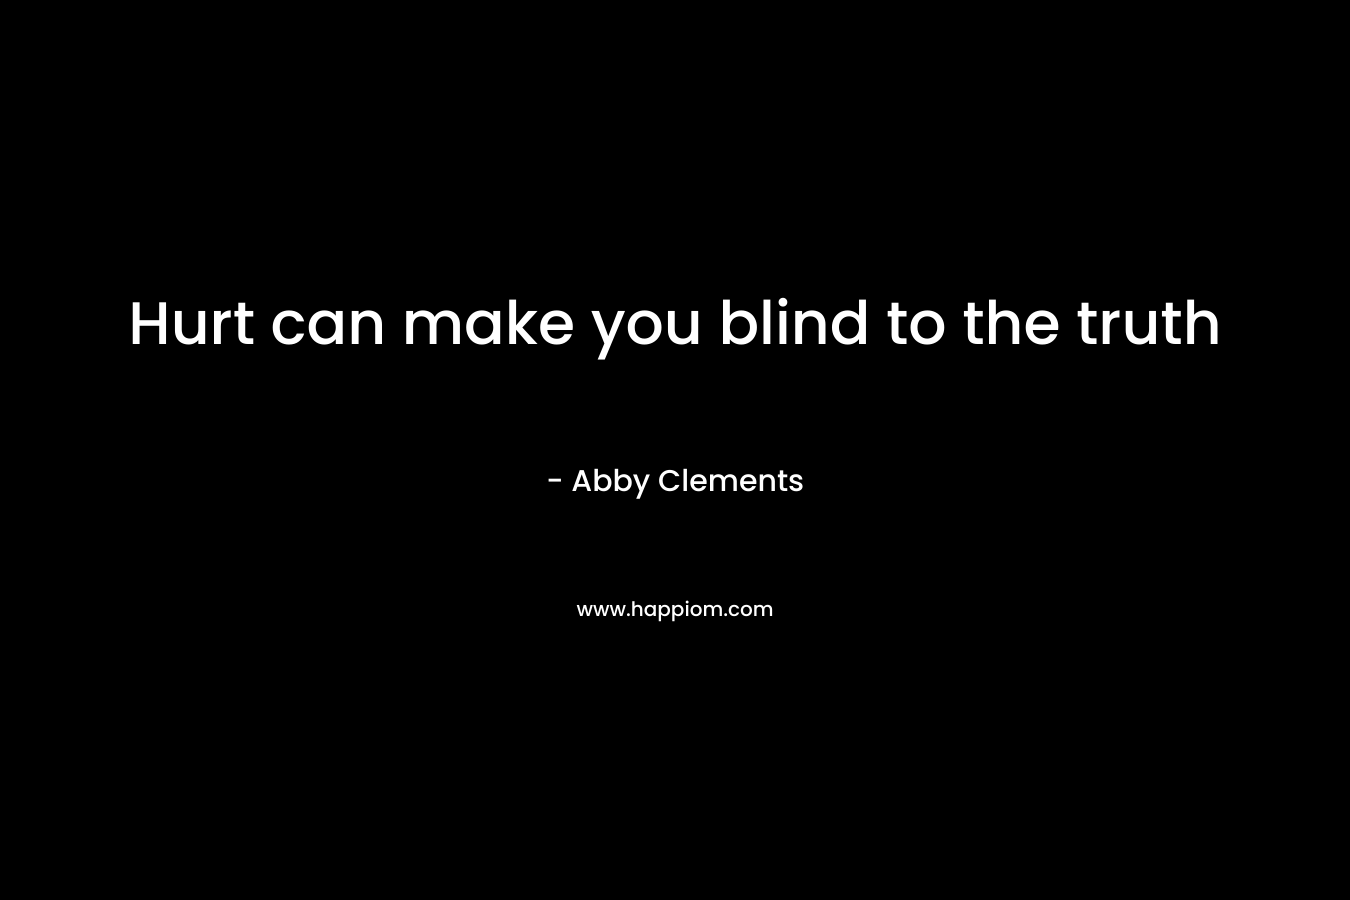 Hurt can make you blind to the truth – Abby Clements